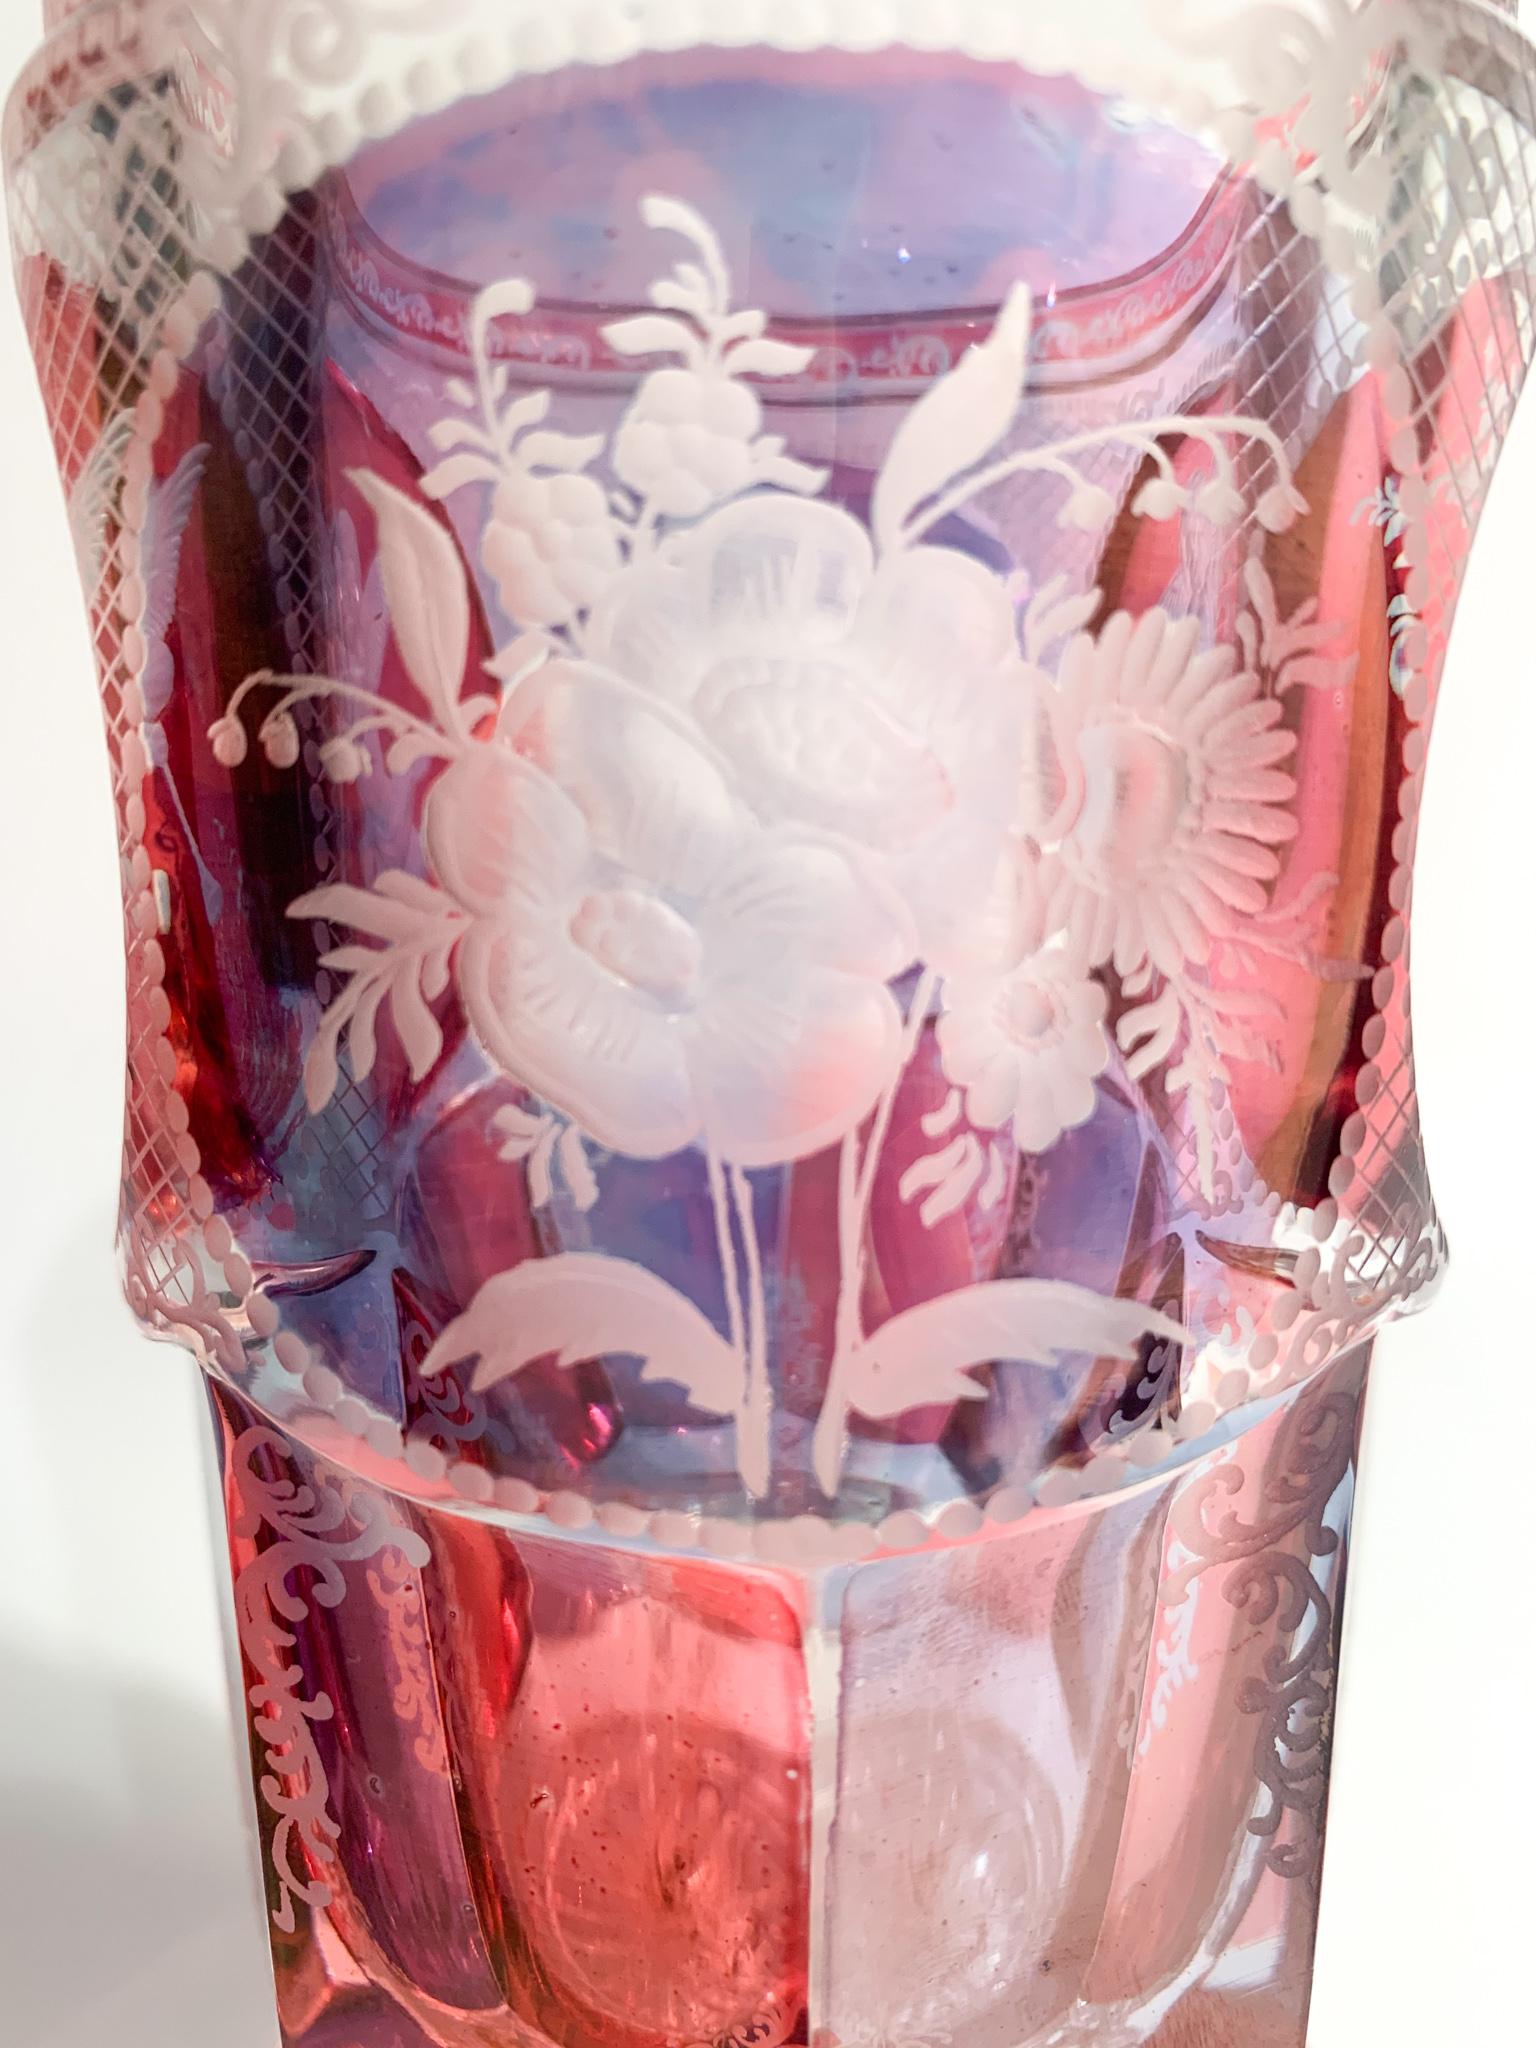 Late 19th Century Pink and Purple Biedermeier Crystal Glass Decorated with Acid in 1800